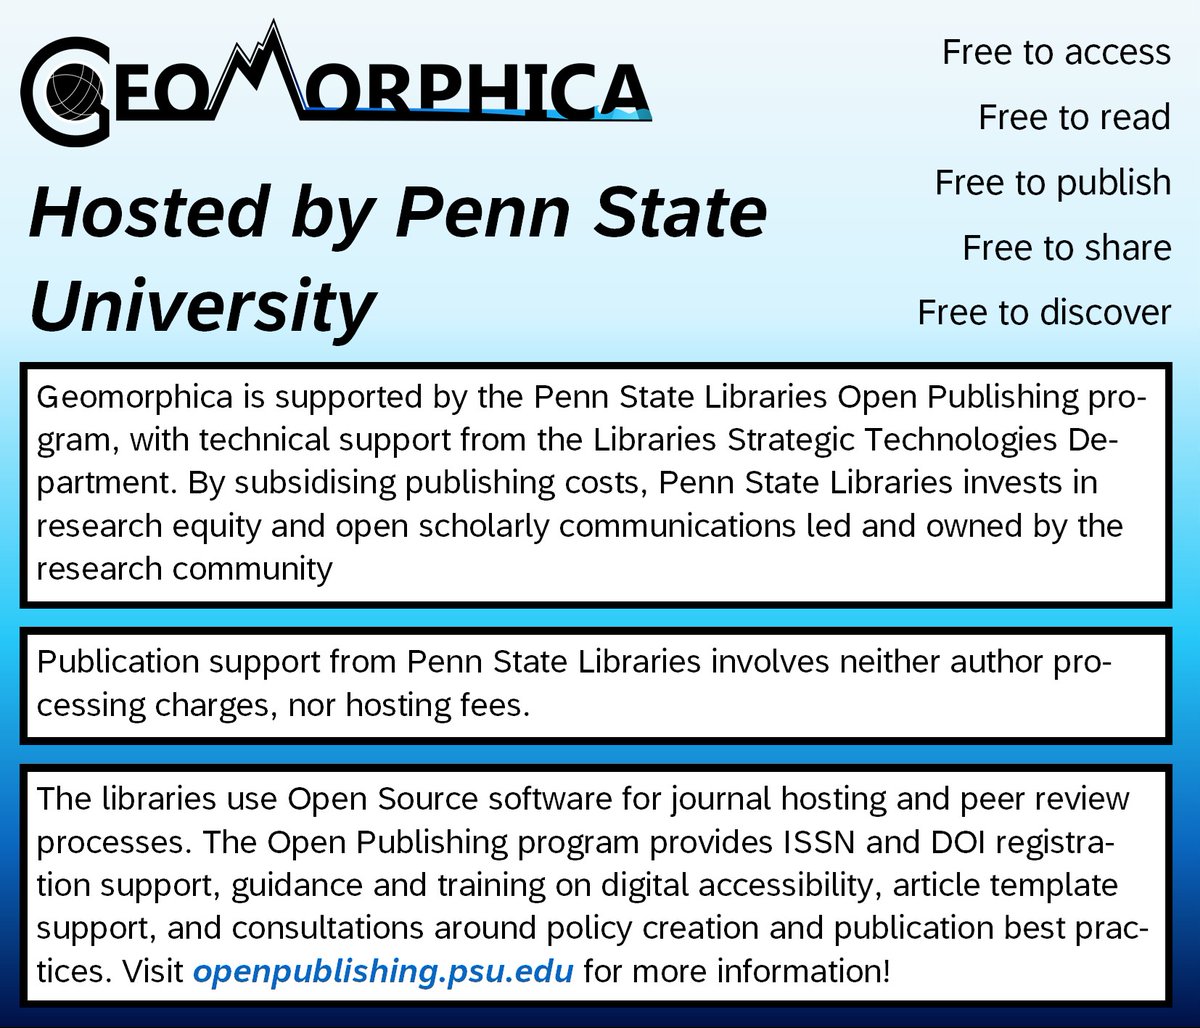 This #factfriday, we’re talking about Penn State University Libraries, who host Geomorphica as part of their open publishing program. This support is vital in #DiamondOpenAccess, keeping research free to both authors and readers.